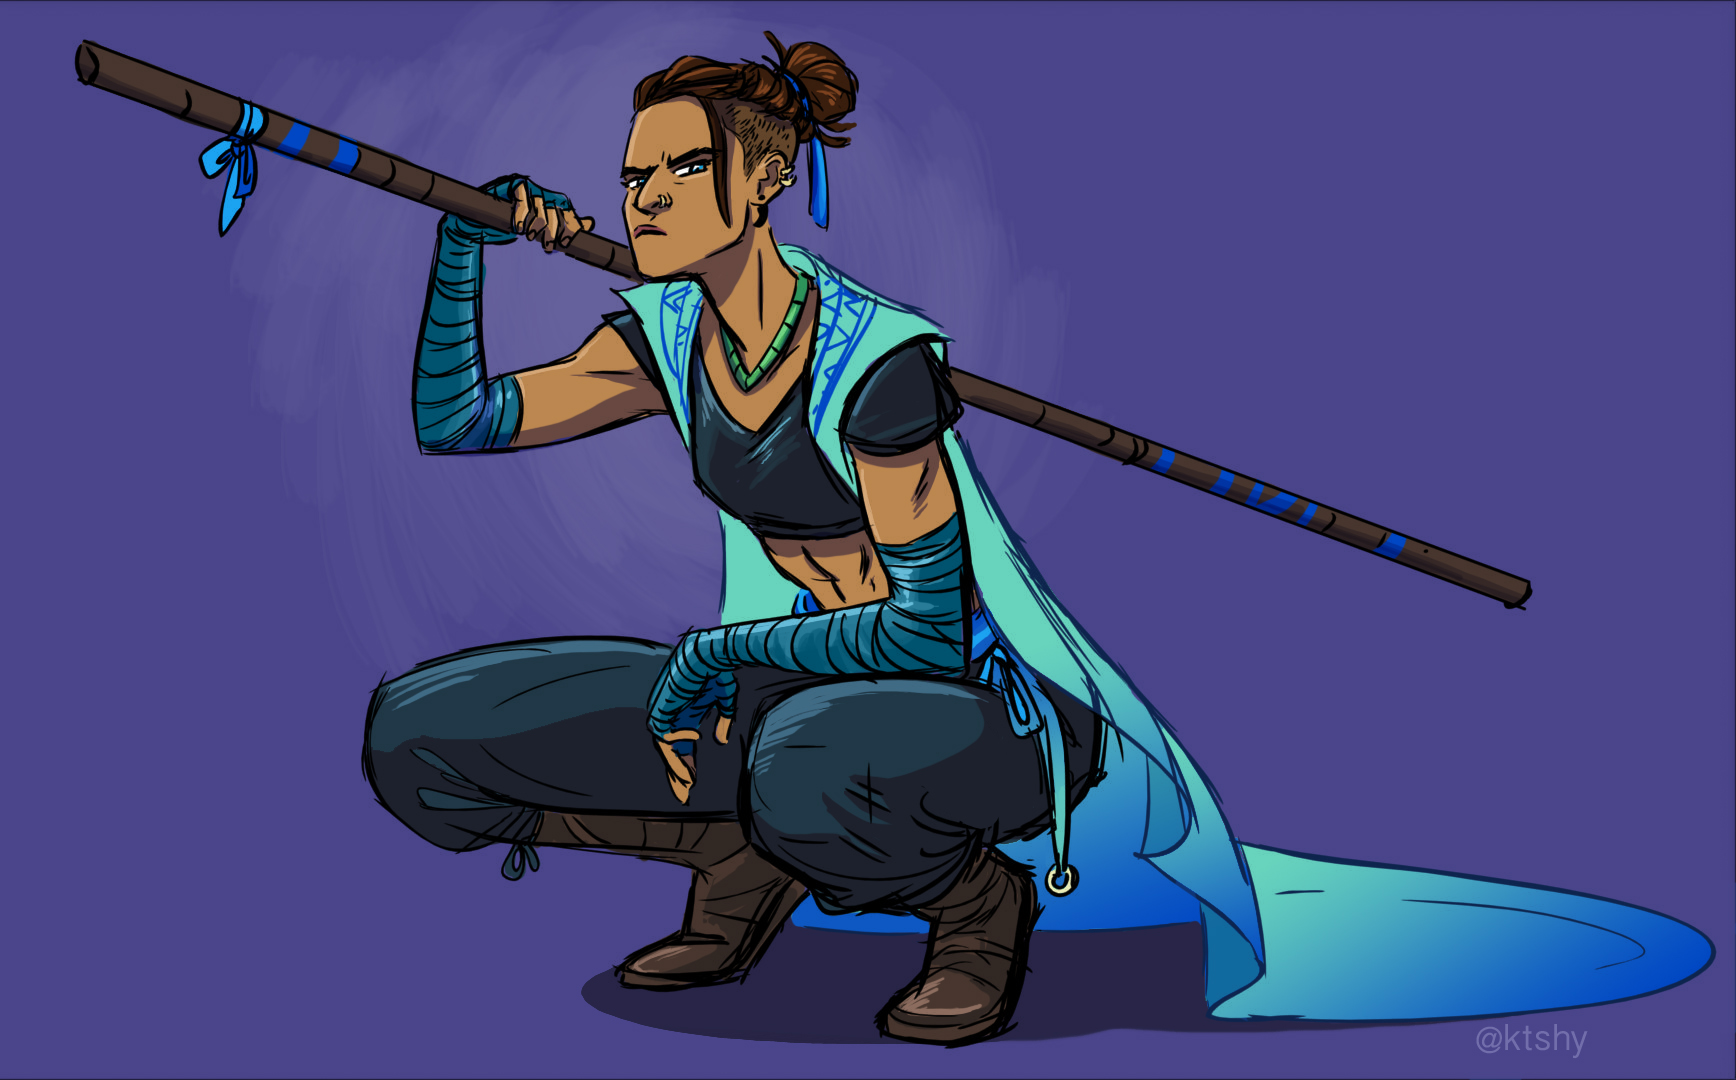  Beau from Critical Role. 